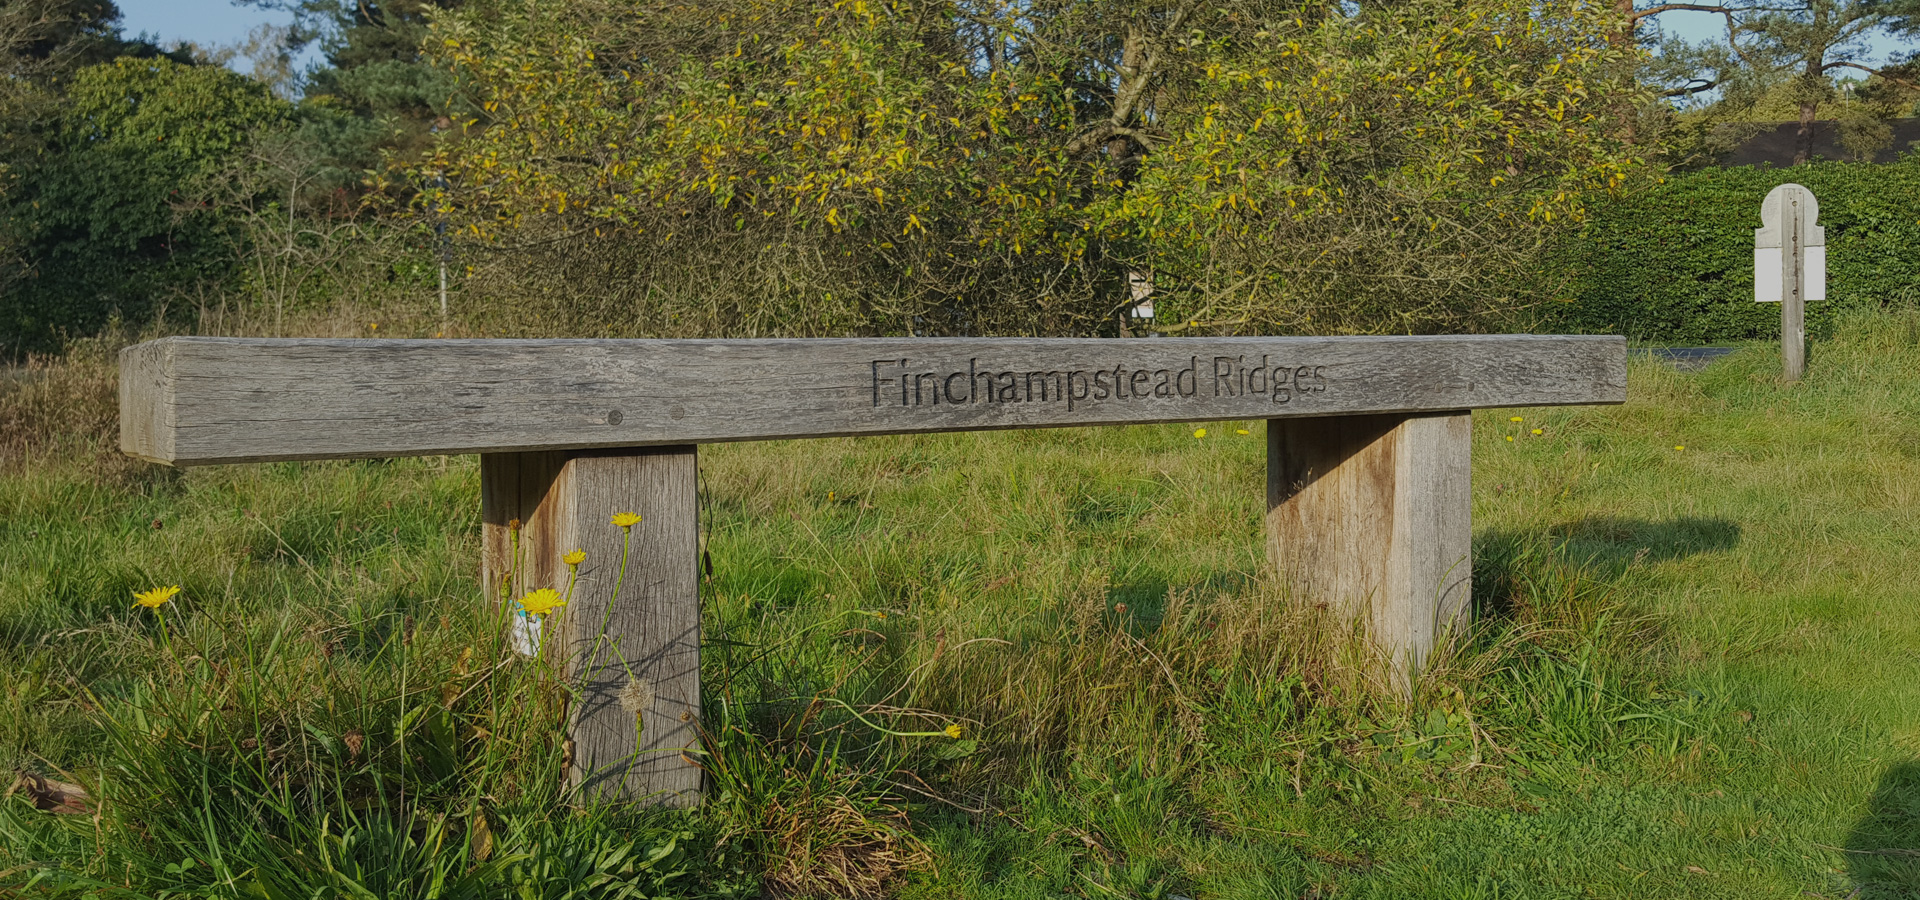 Wooden bench in grass with Finchampstead Ridges engraved on it